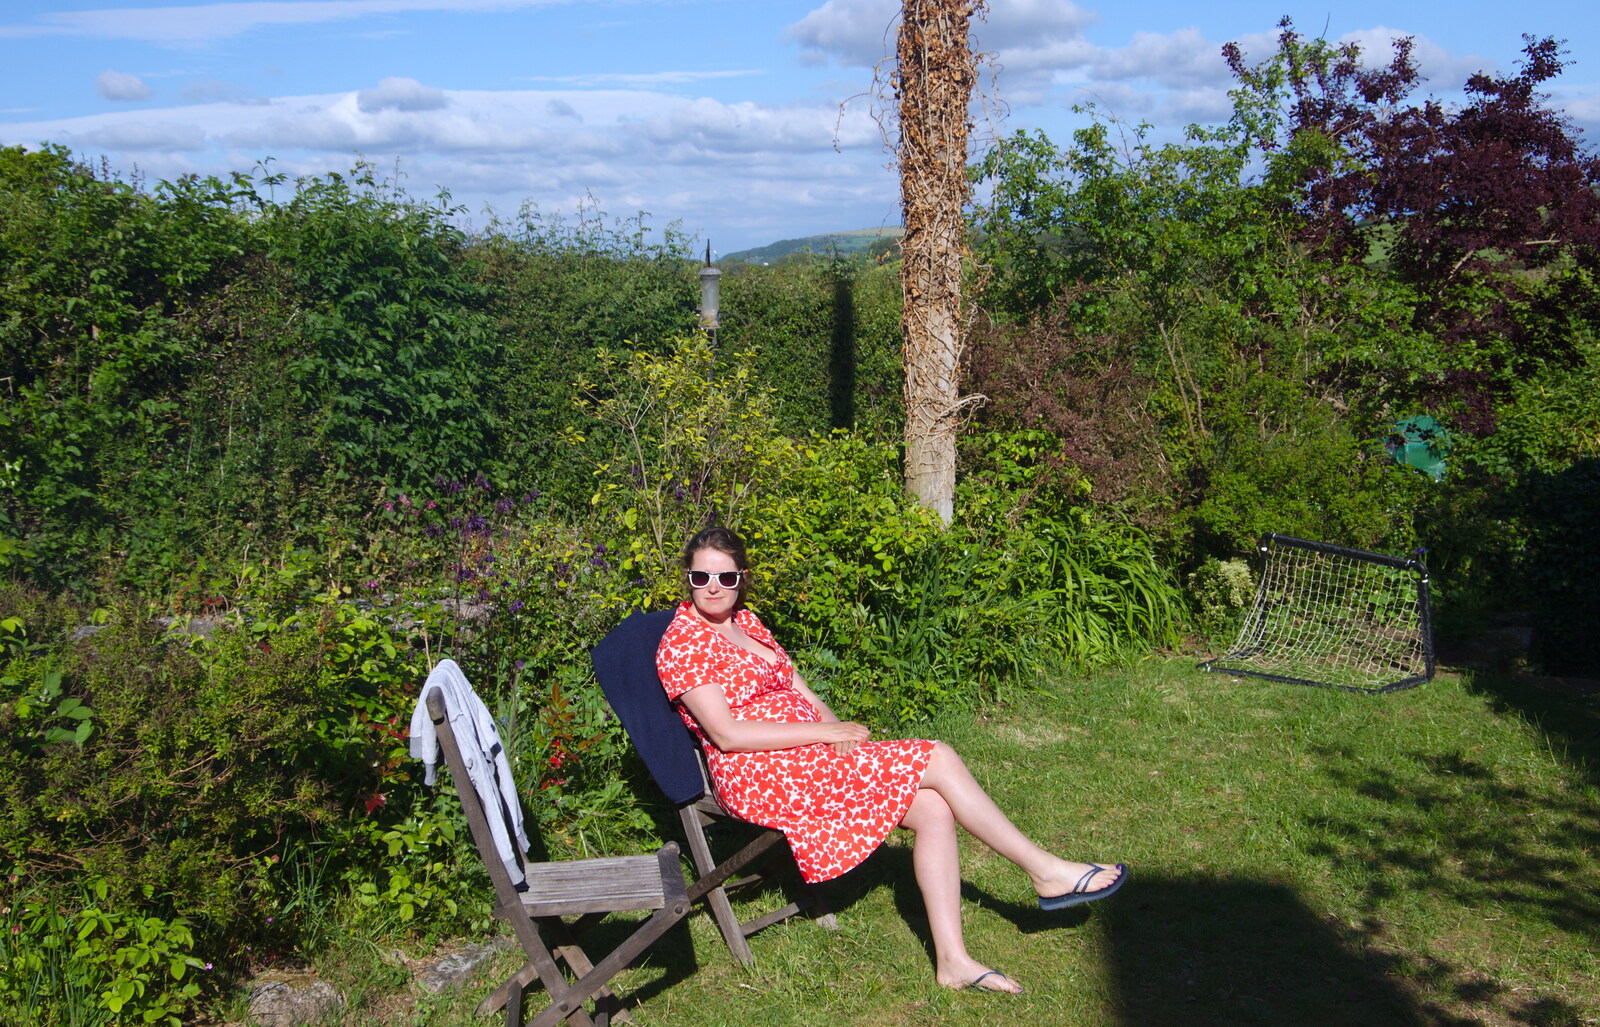 Isobel in Matt and Sis's back garden from Chagford Lido and a Trip to Parke, Bovey Tracey, Devon - 25th May 2019